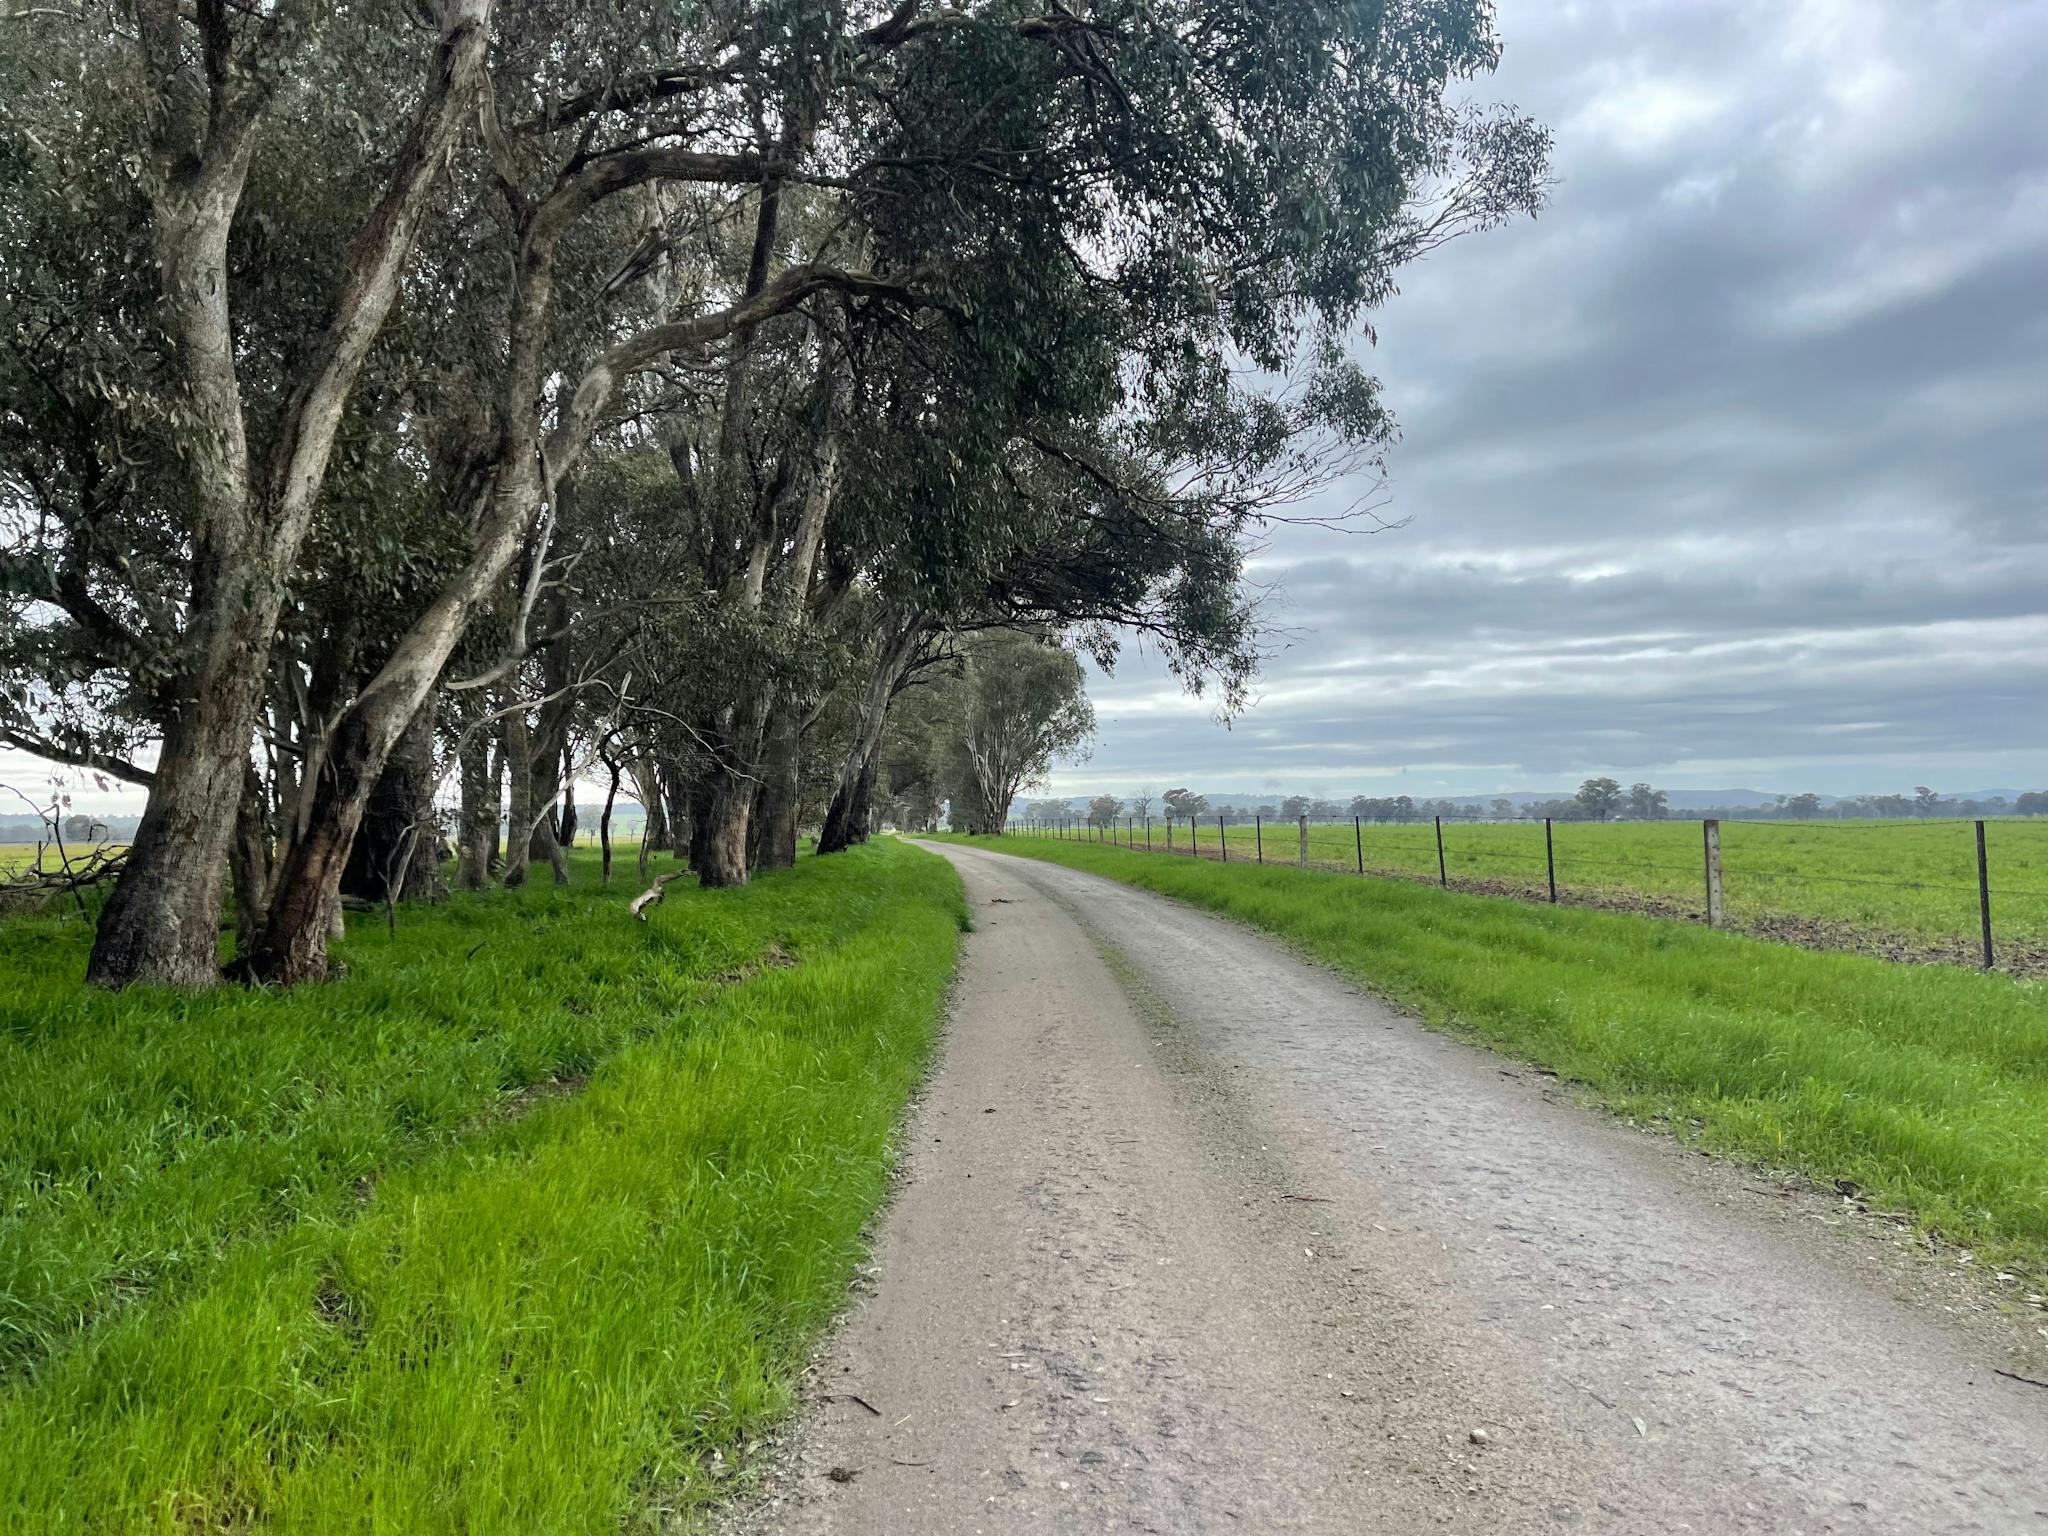 Gravel road, green grass and gum trees on left green grass & fence on right cloudy sky